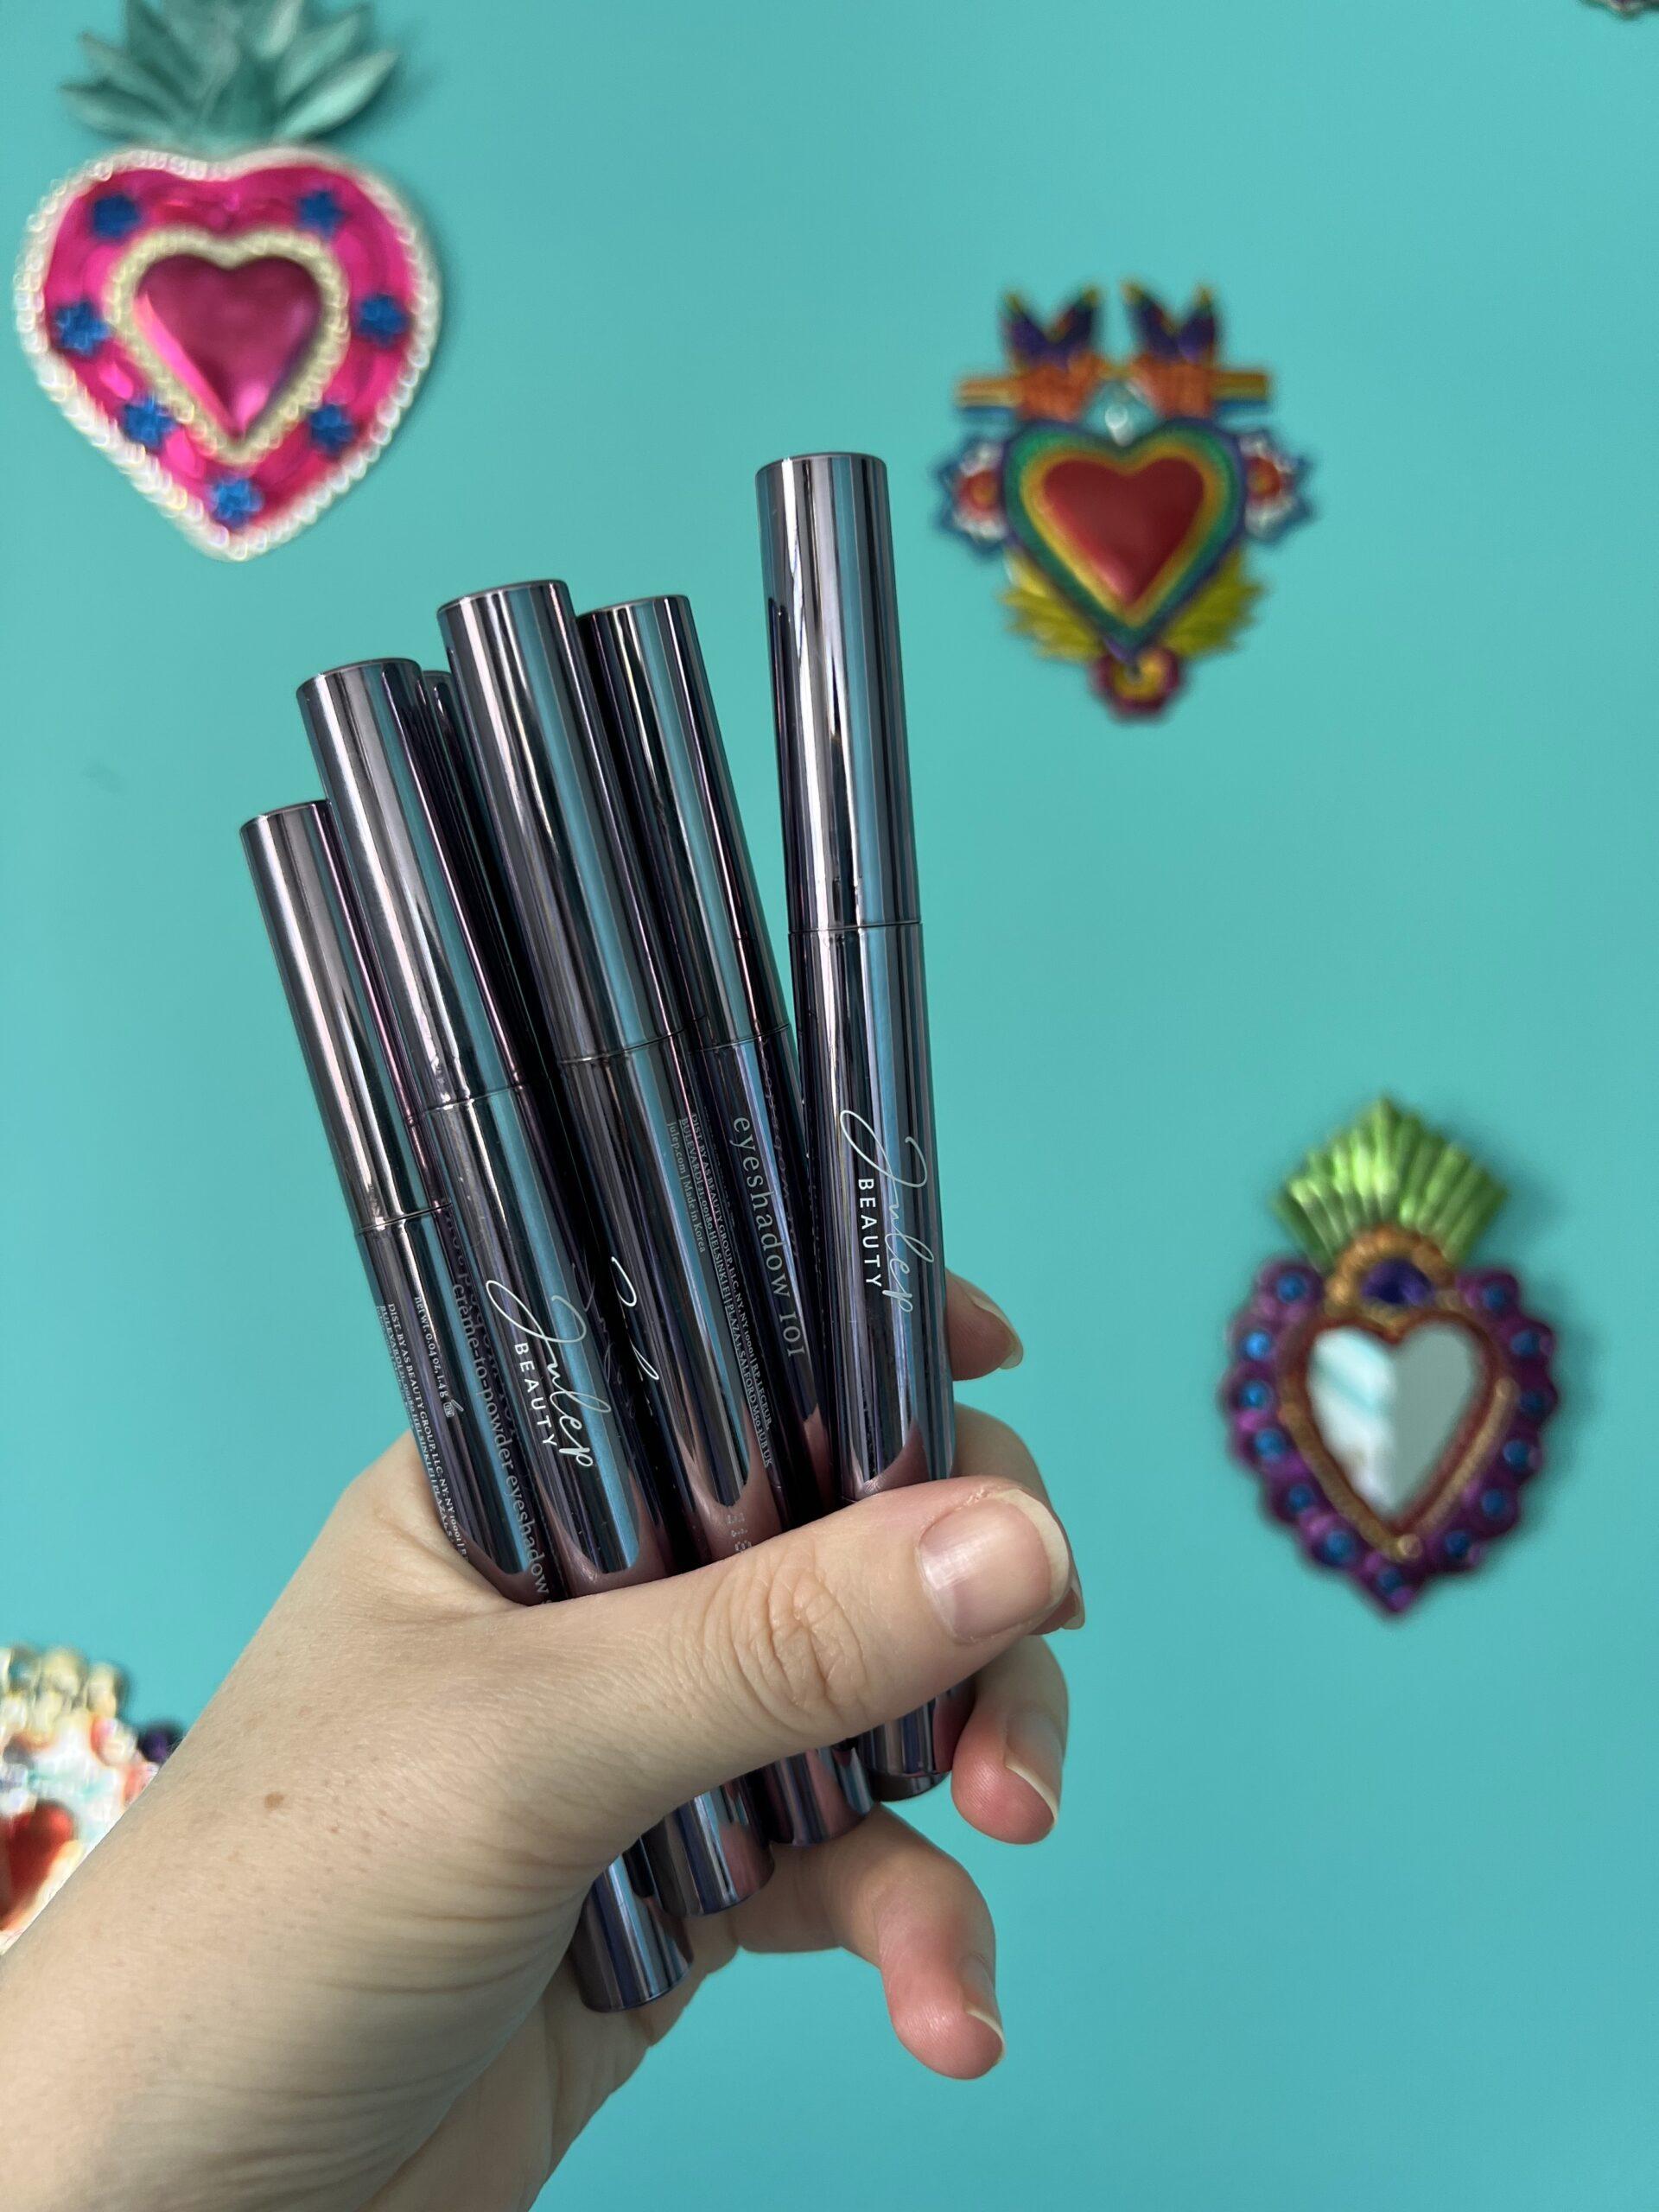 Julep Eyeshadow Stick Reviews: Here's What You Need to Know